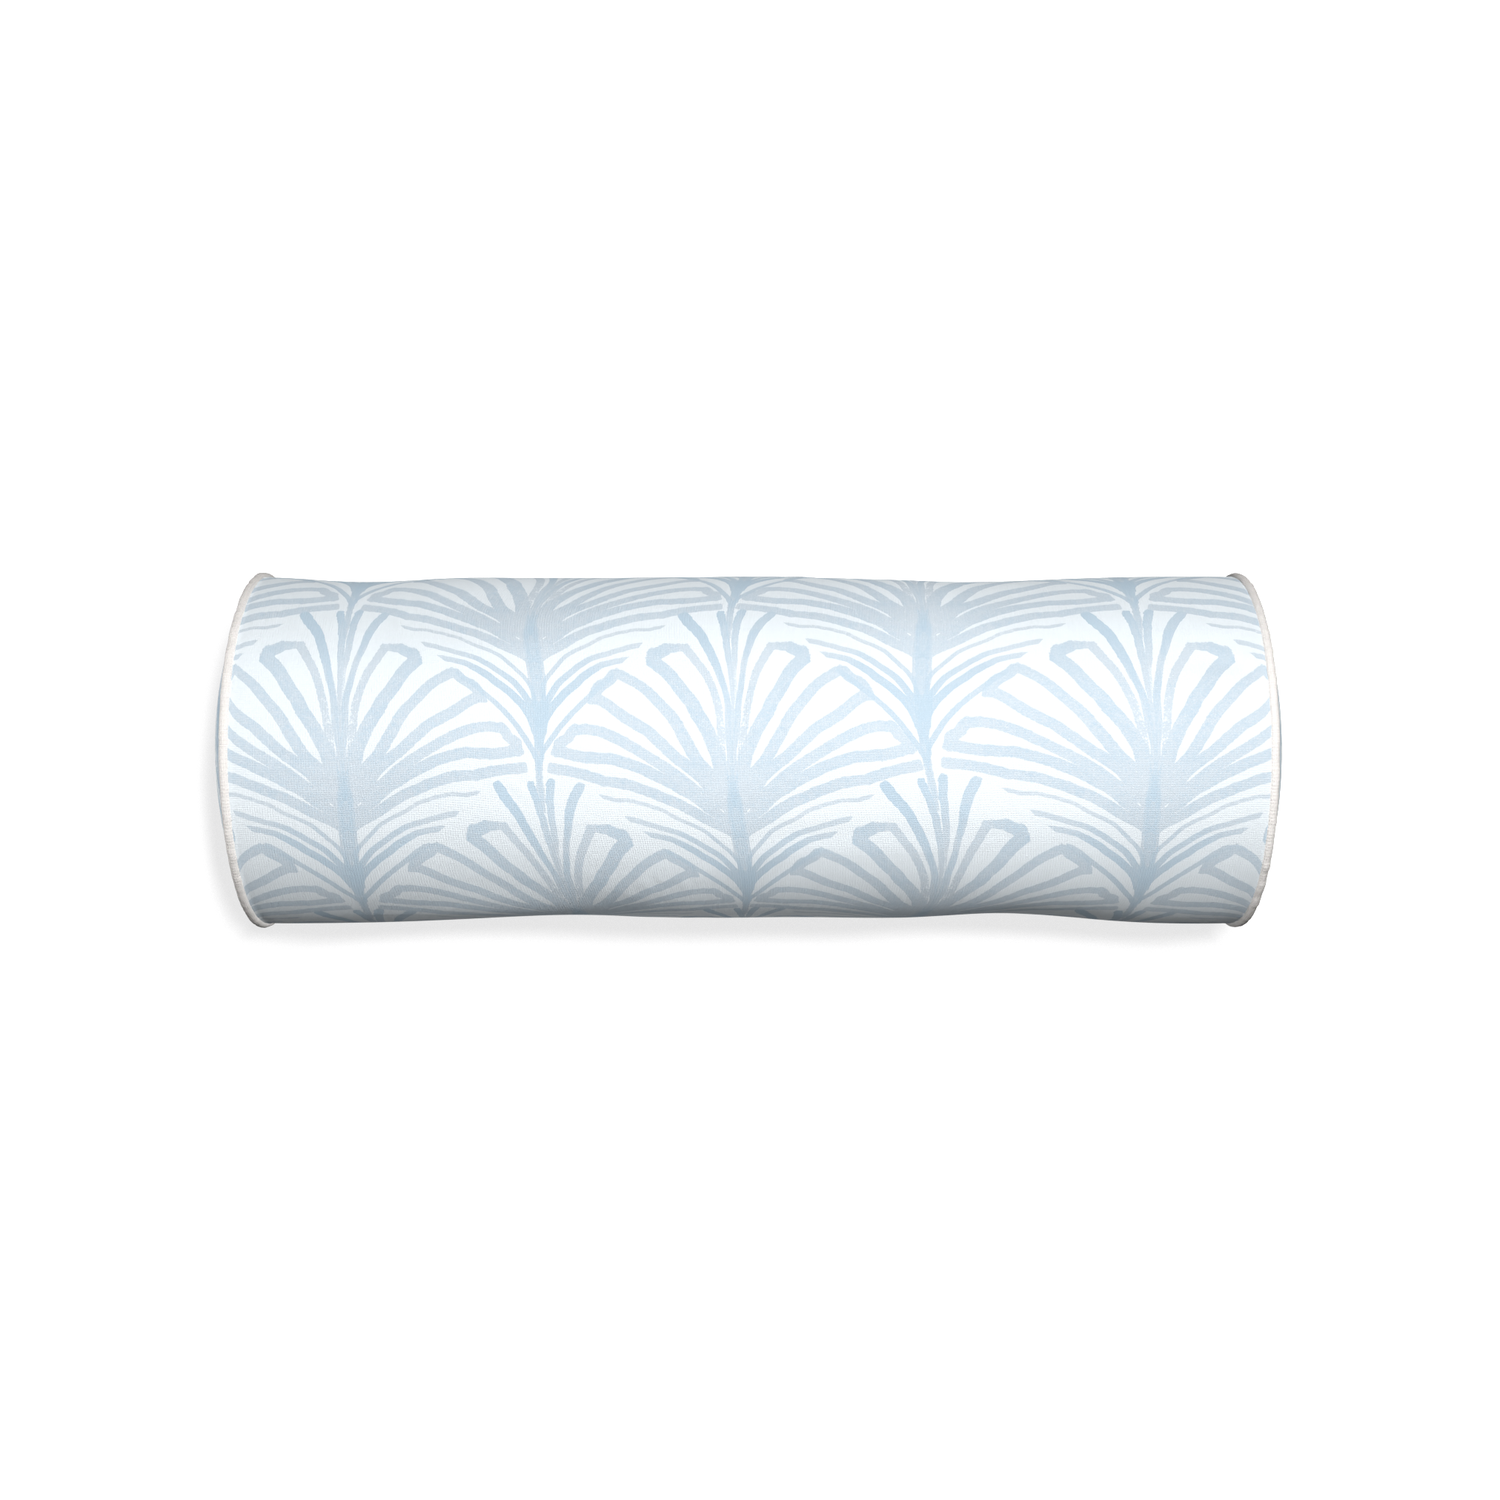 Bolster suzy sky custom sky blue palmpillow with snow piping on white background